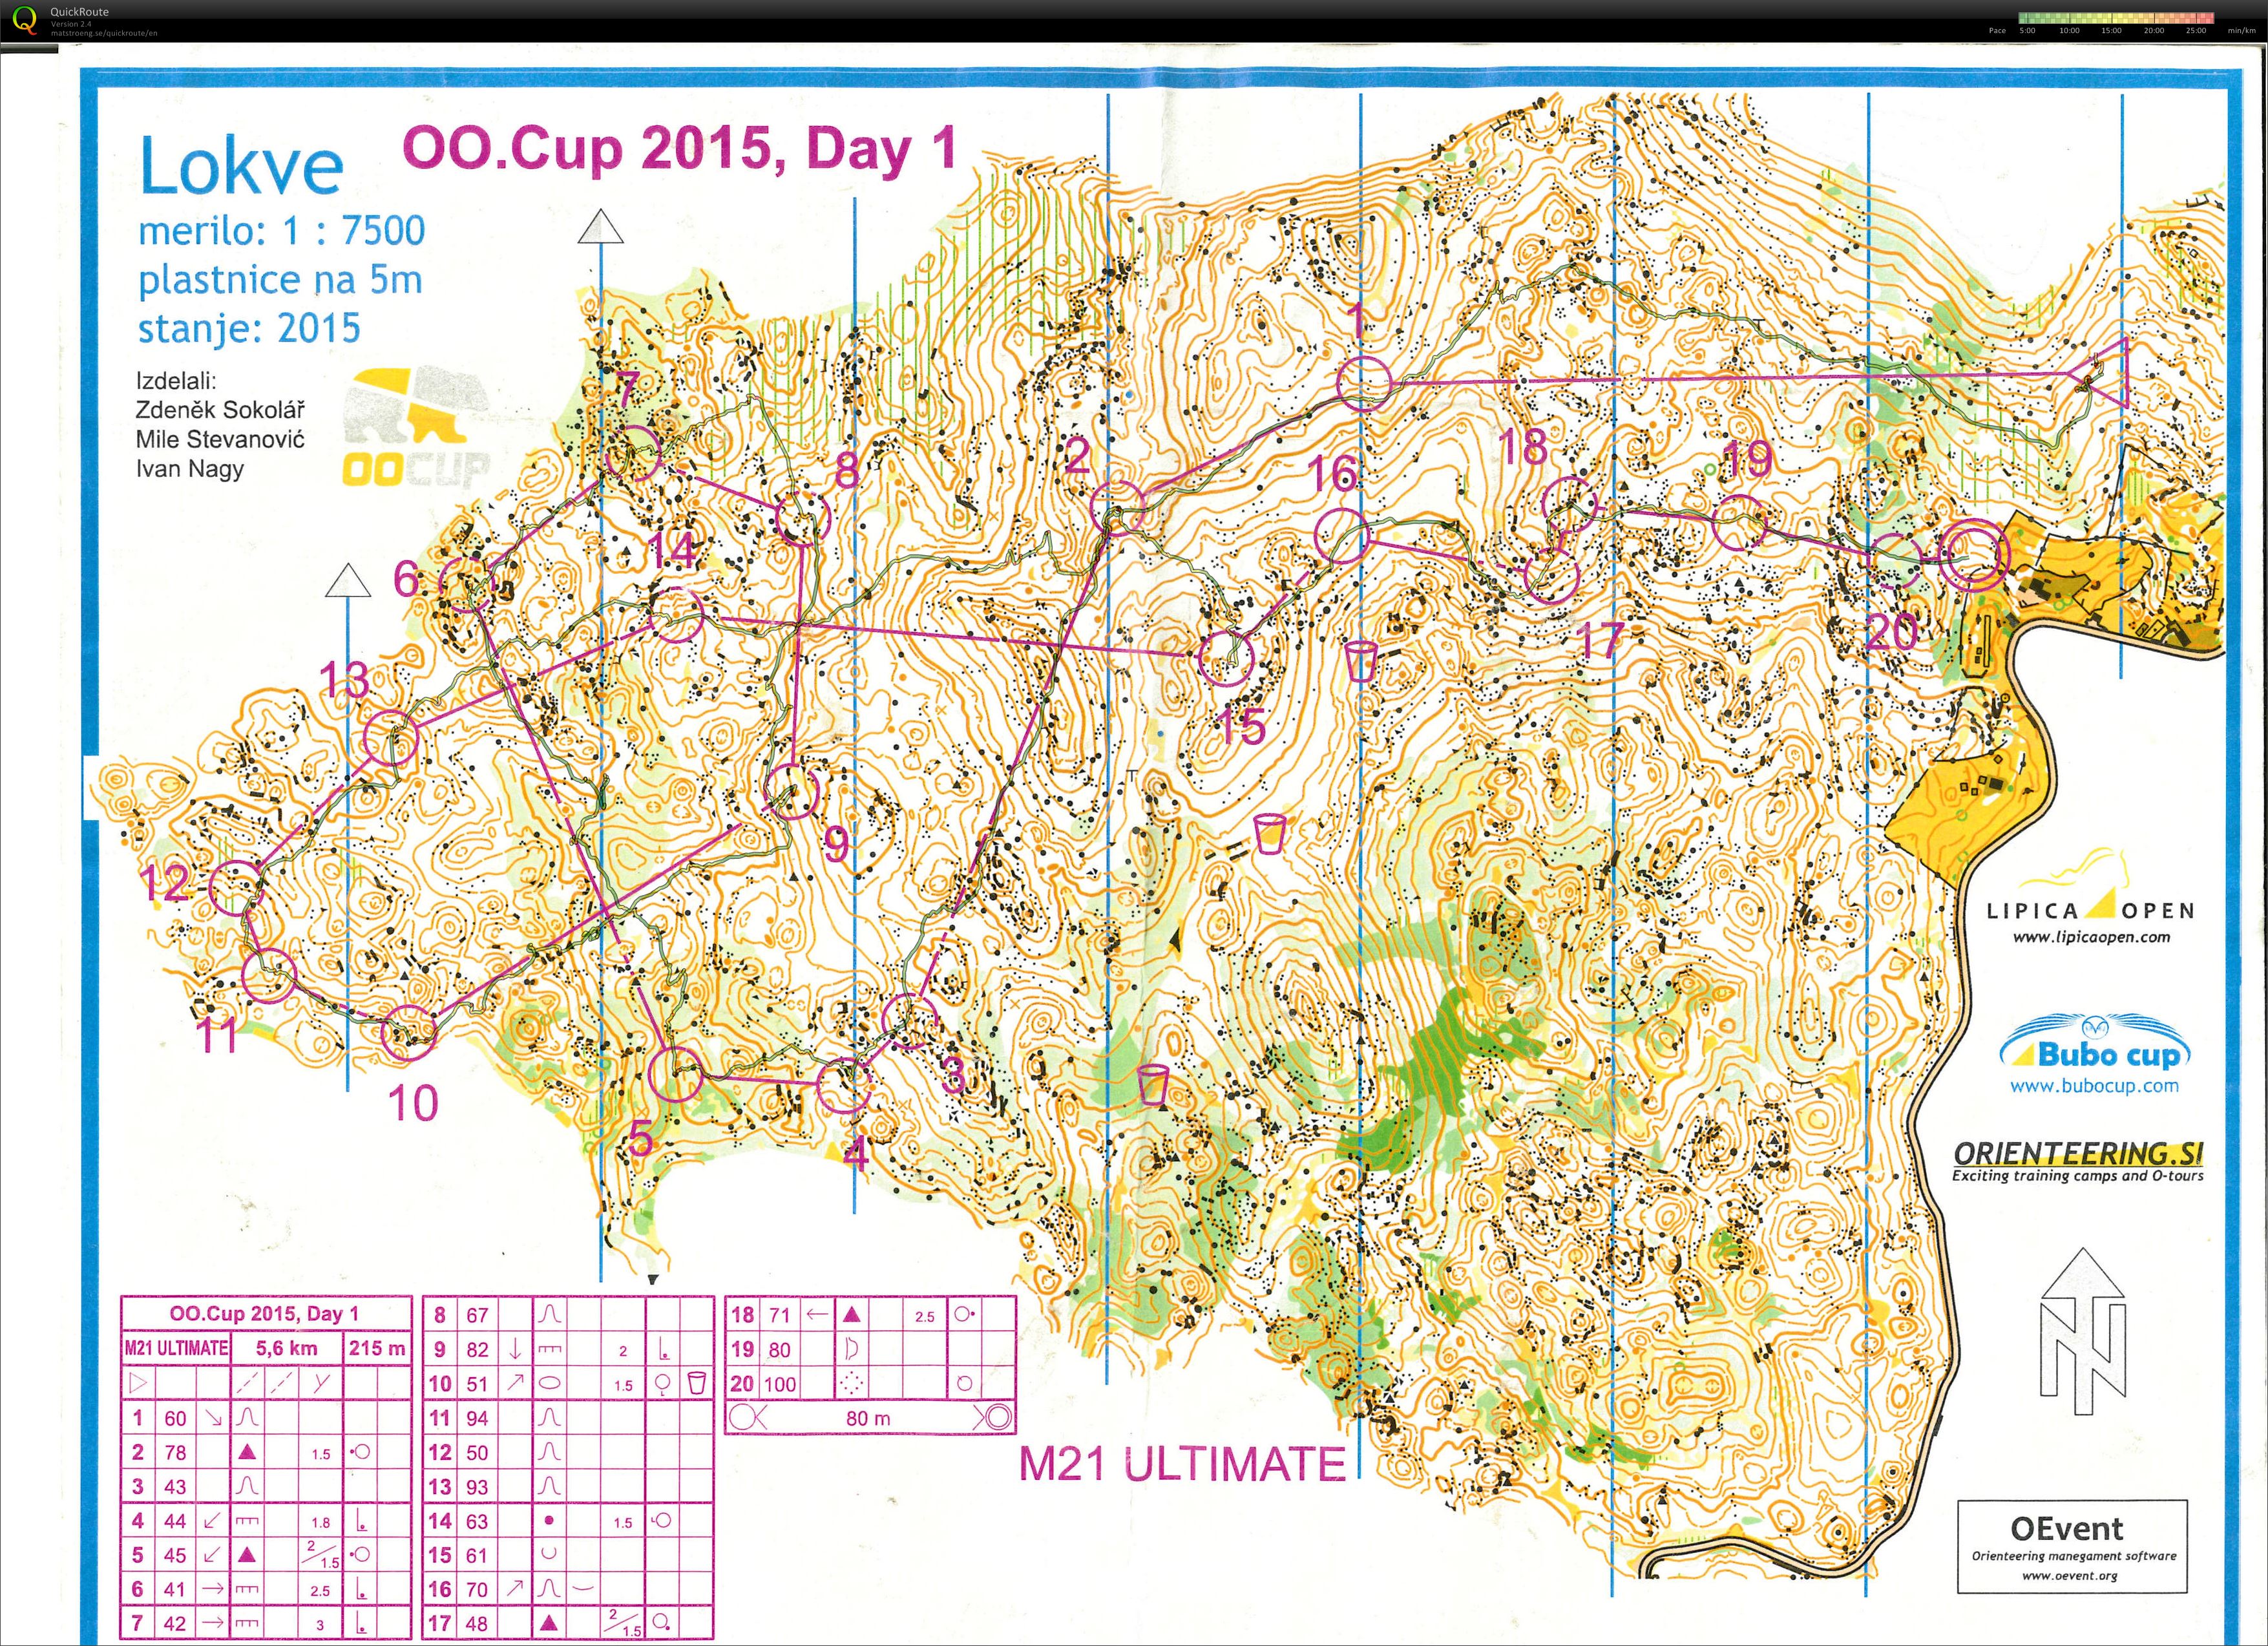 OOCup 2015 Stage 1 (25.07.2015)